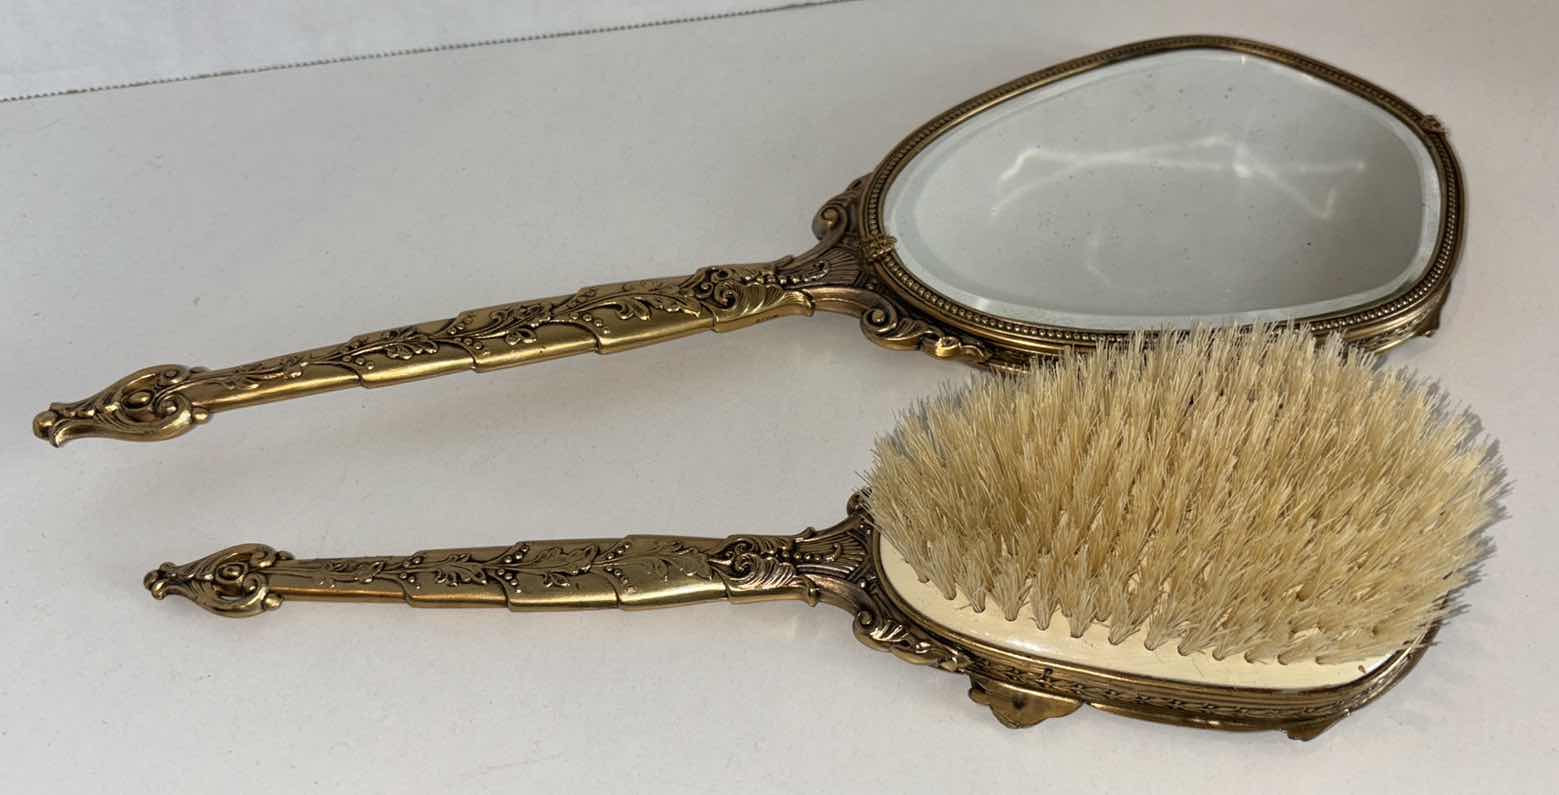 Photo 2 of VINTAGE HANDHELD MIRROR & BRUSH SET, GOLD W FLORAL ACCENTS (MIRROR IS 14”L)